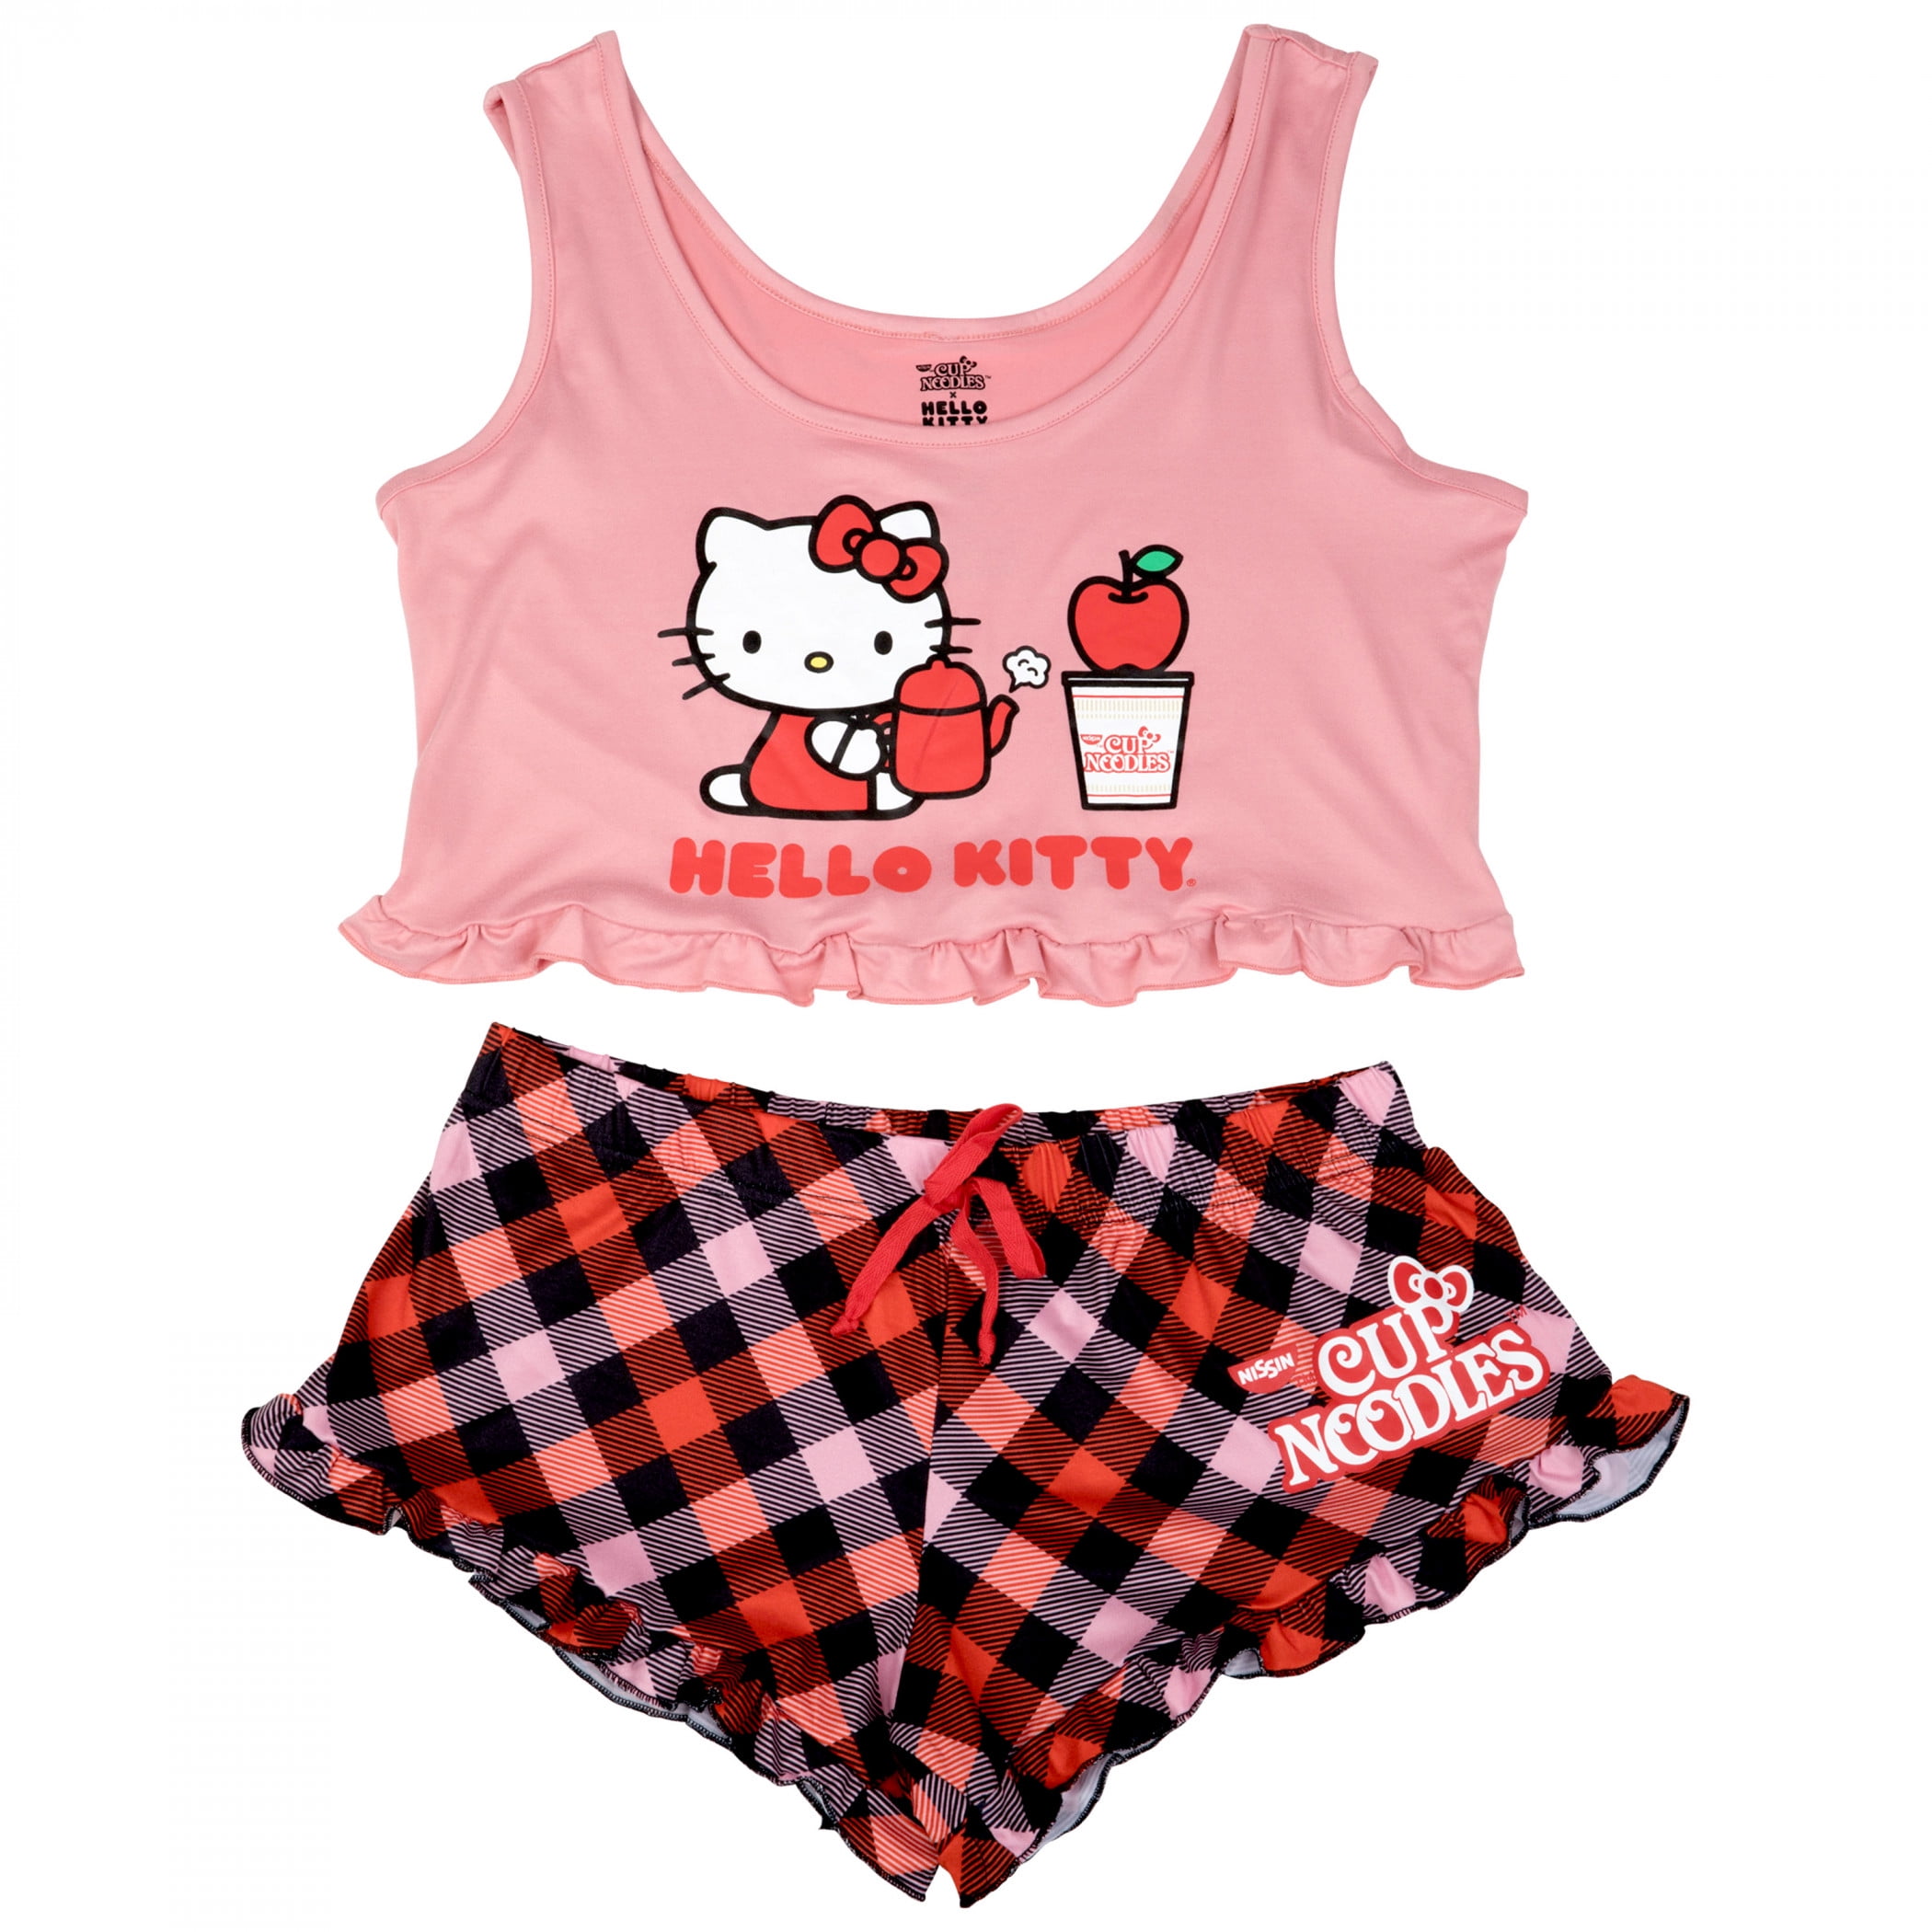 Hello Kitty Sanrio x Nissin Lounge Set Pink and Plaid Pair-Large -  